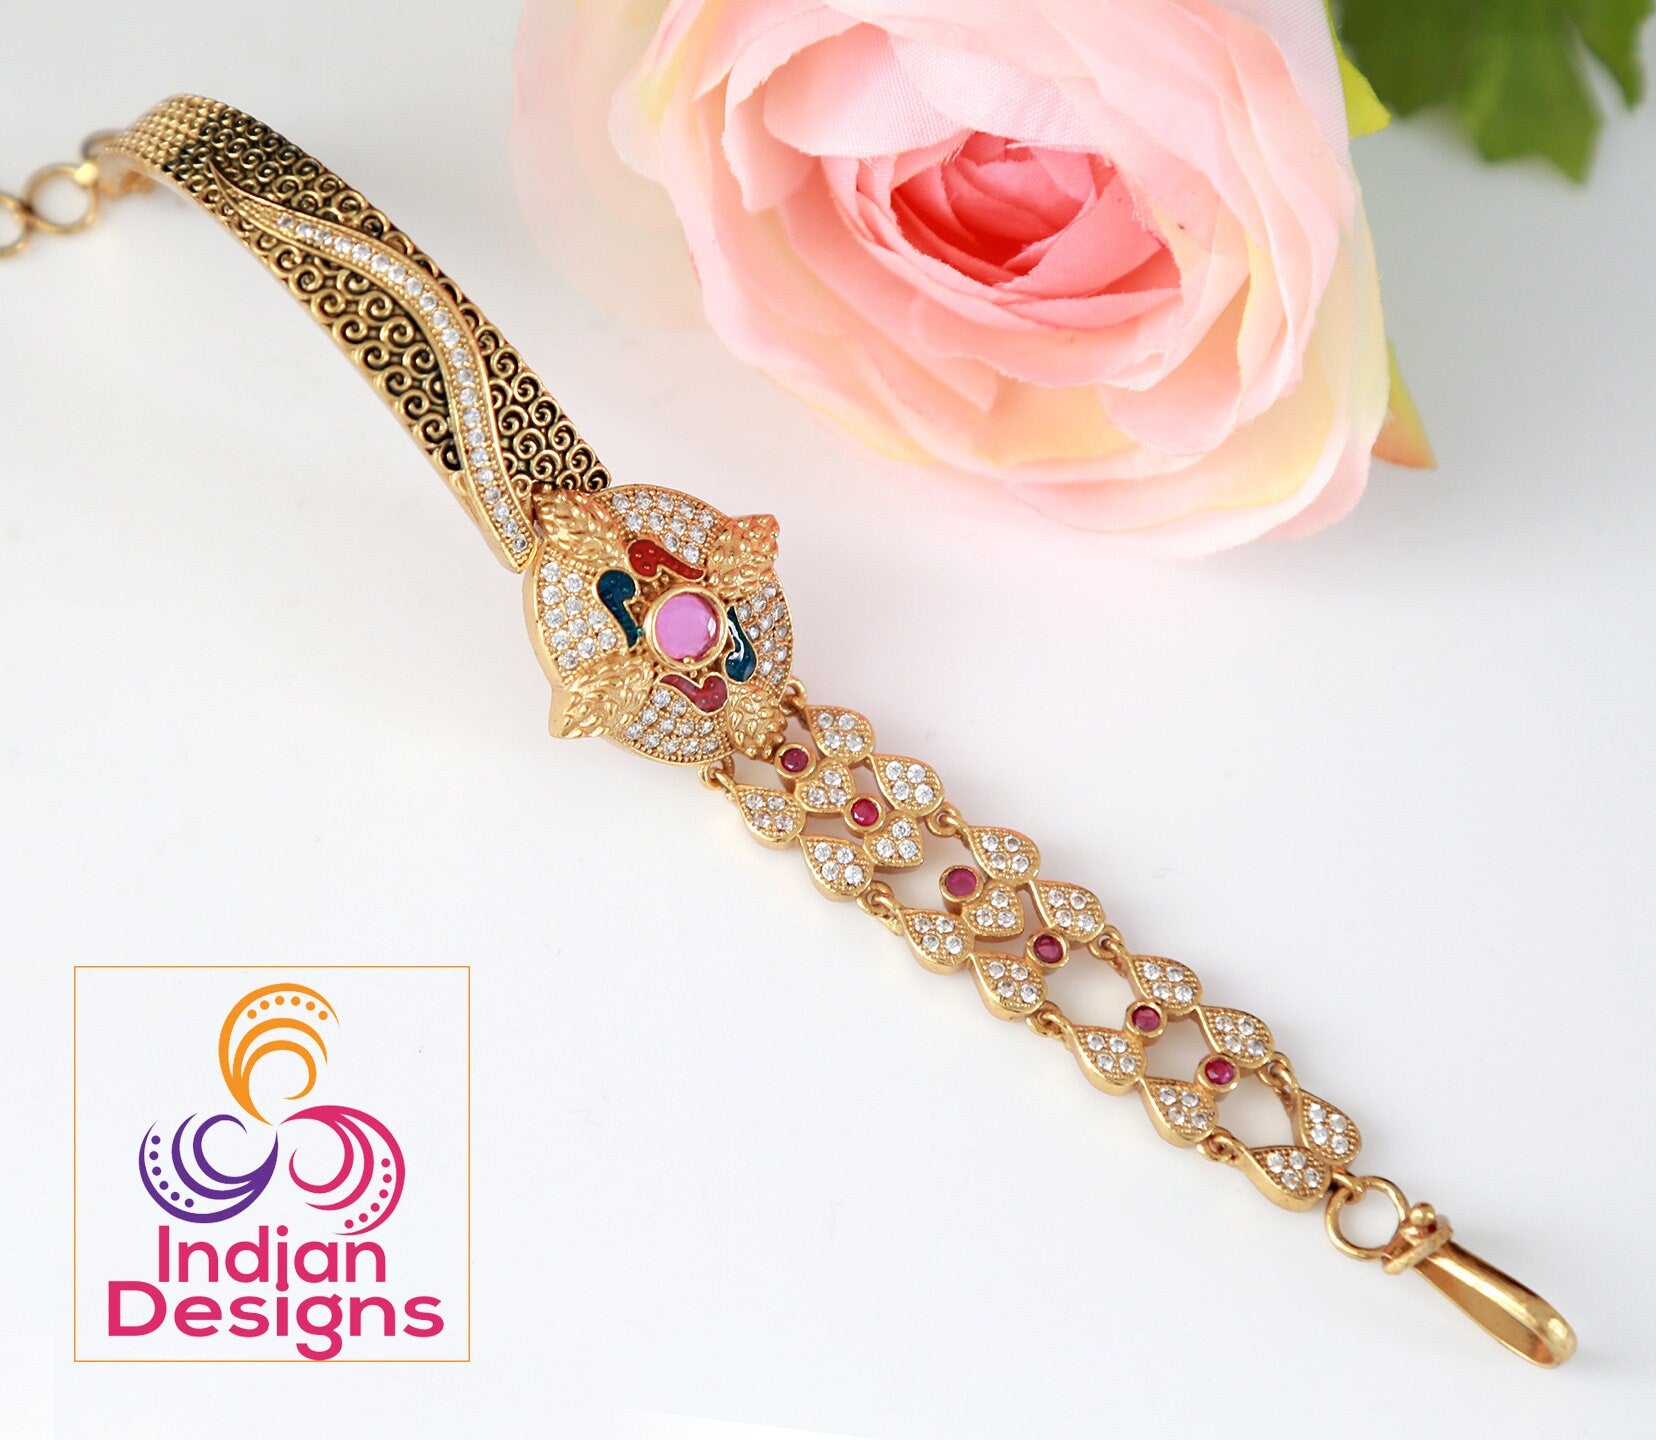 Bohemian Turkey Hollow Flower Gold Bracelet For Women Adjustable Size Cuff  Susanna Bangles With Brand Design Perfect Gift Q0719 From Sihuai05, $5.42 |  DHgate.Com